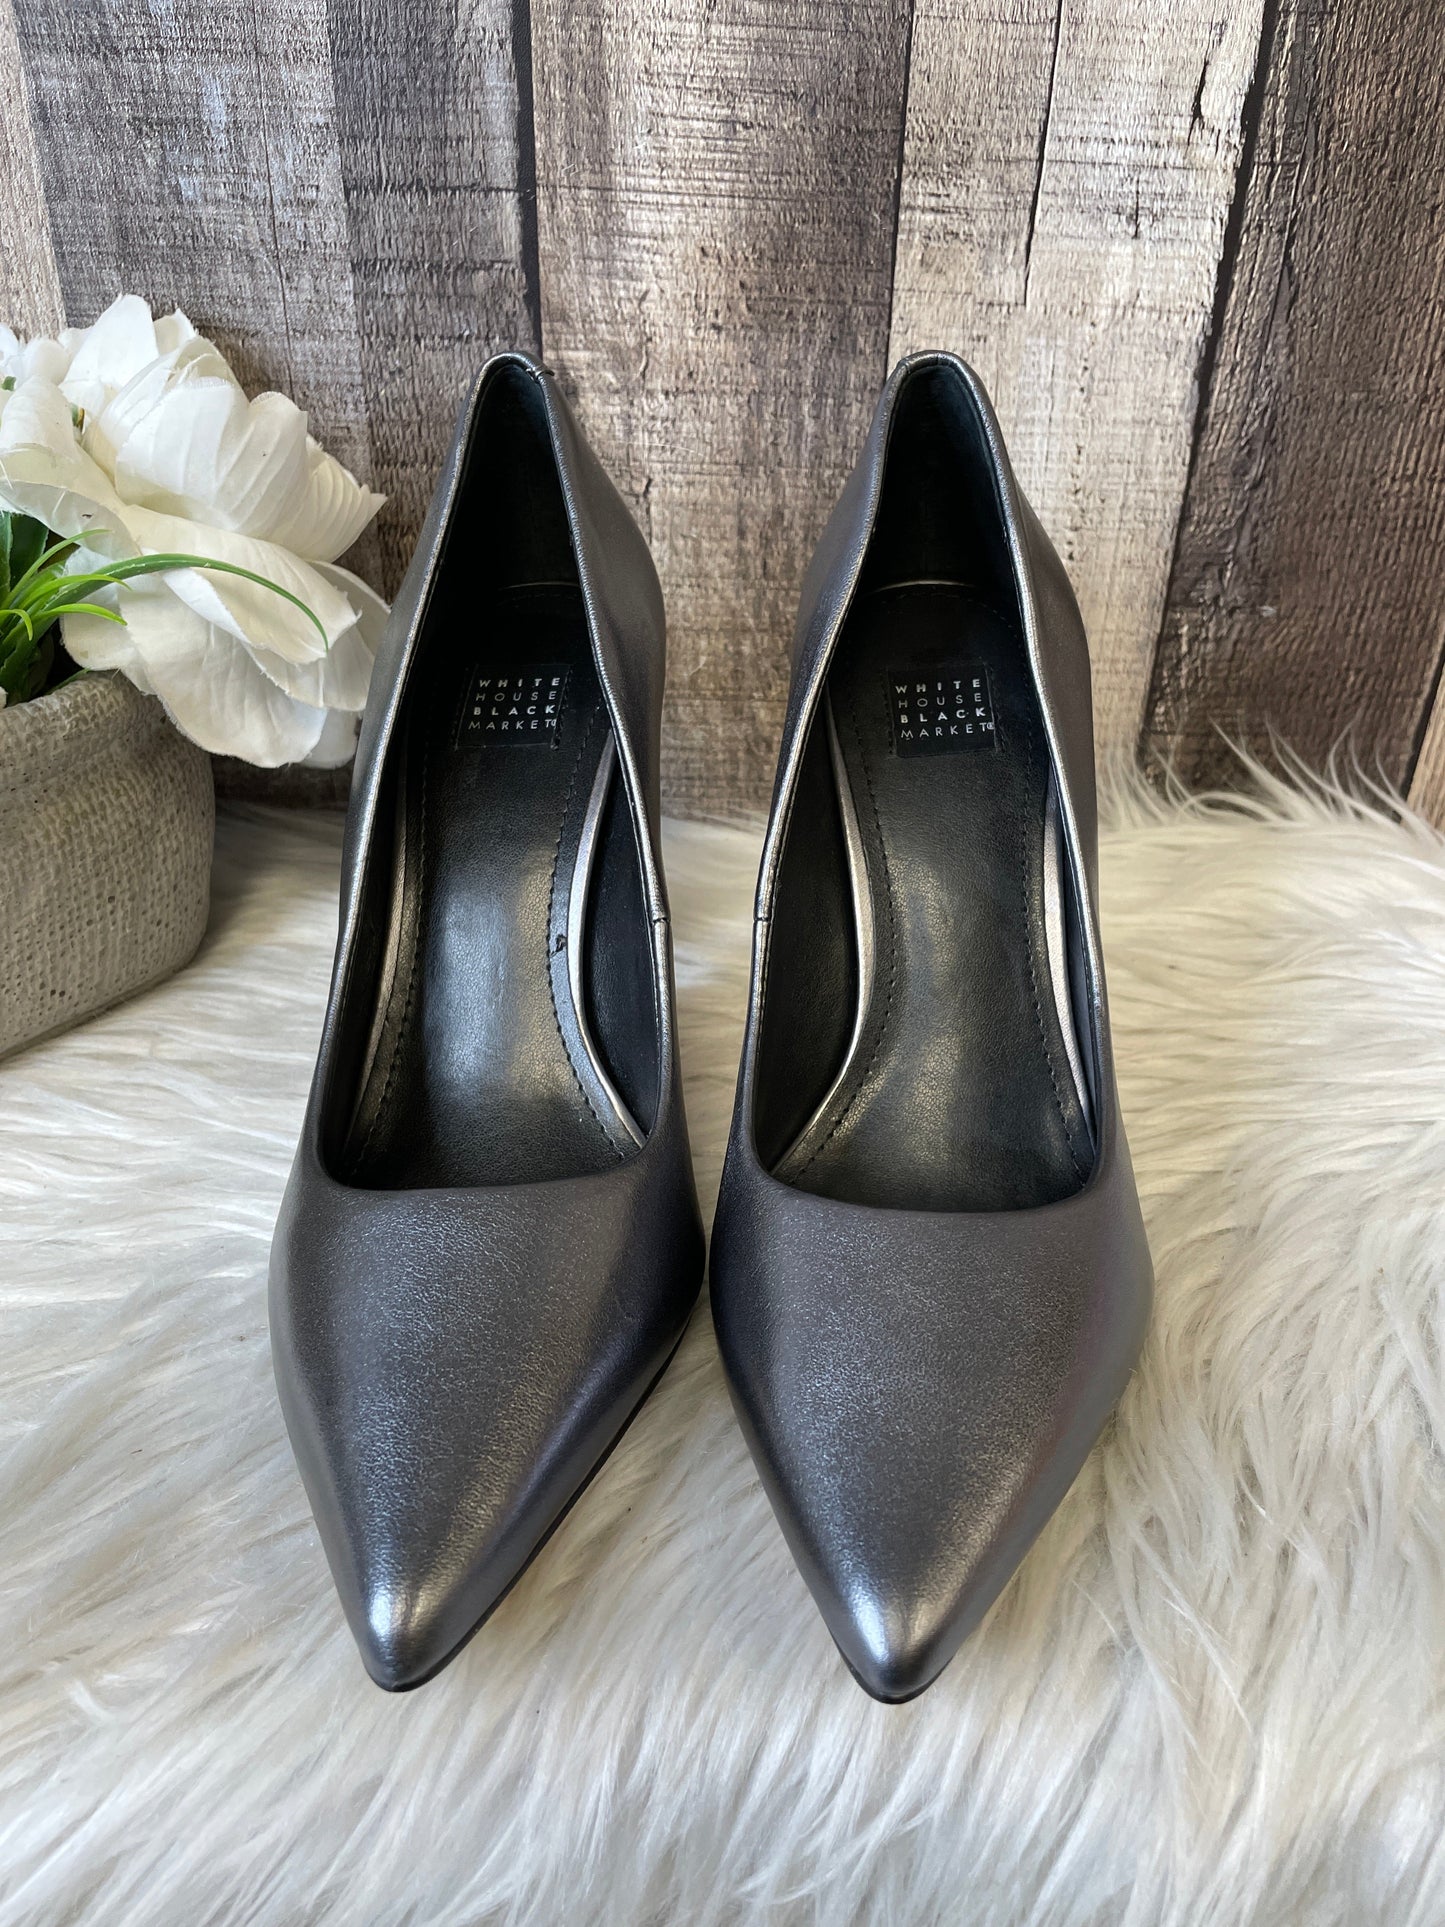 Shoes Heels Stiletto By White House Black Market  Size: 7